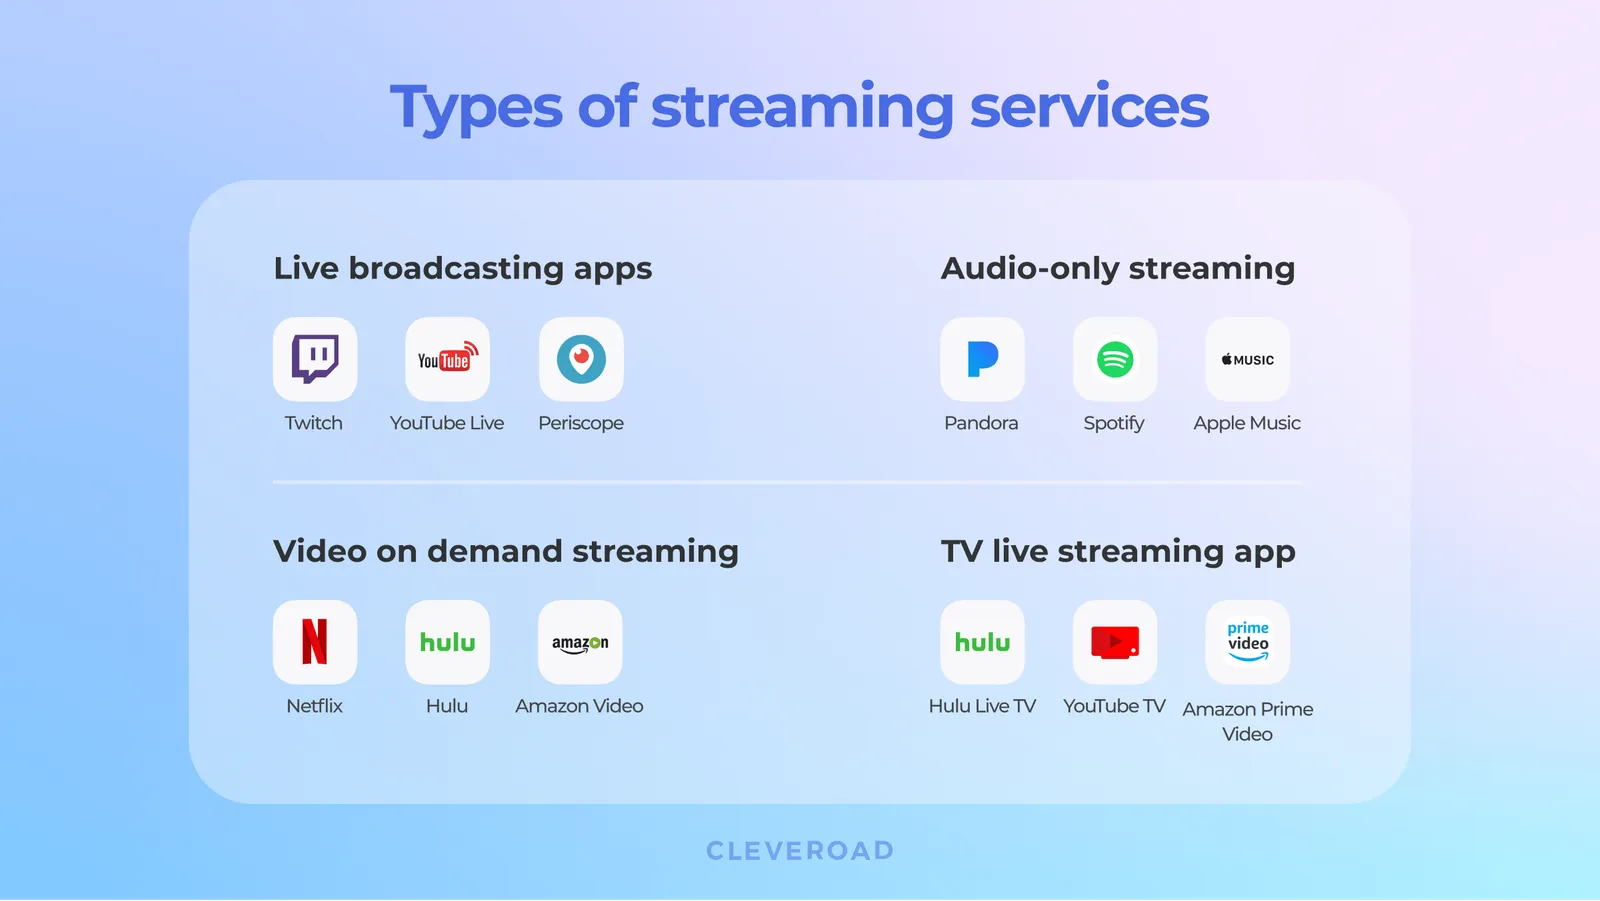 What types of streaming services exist?